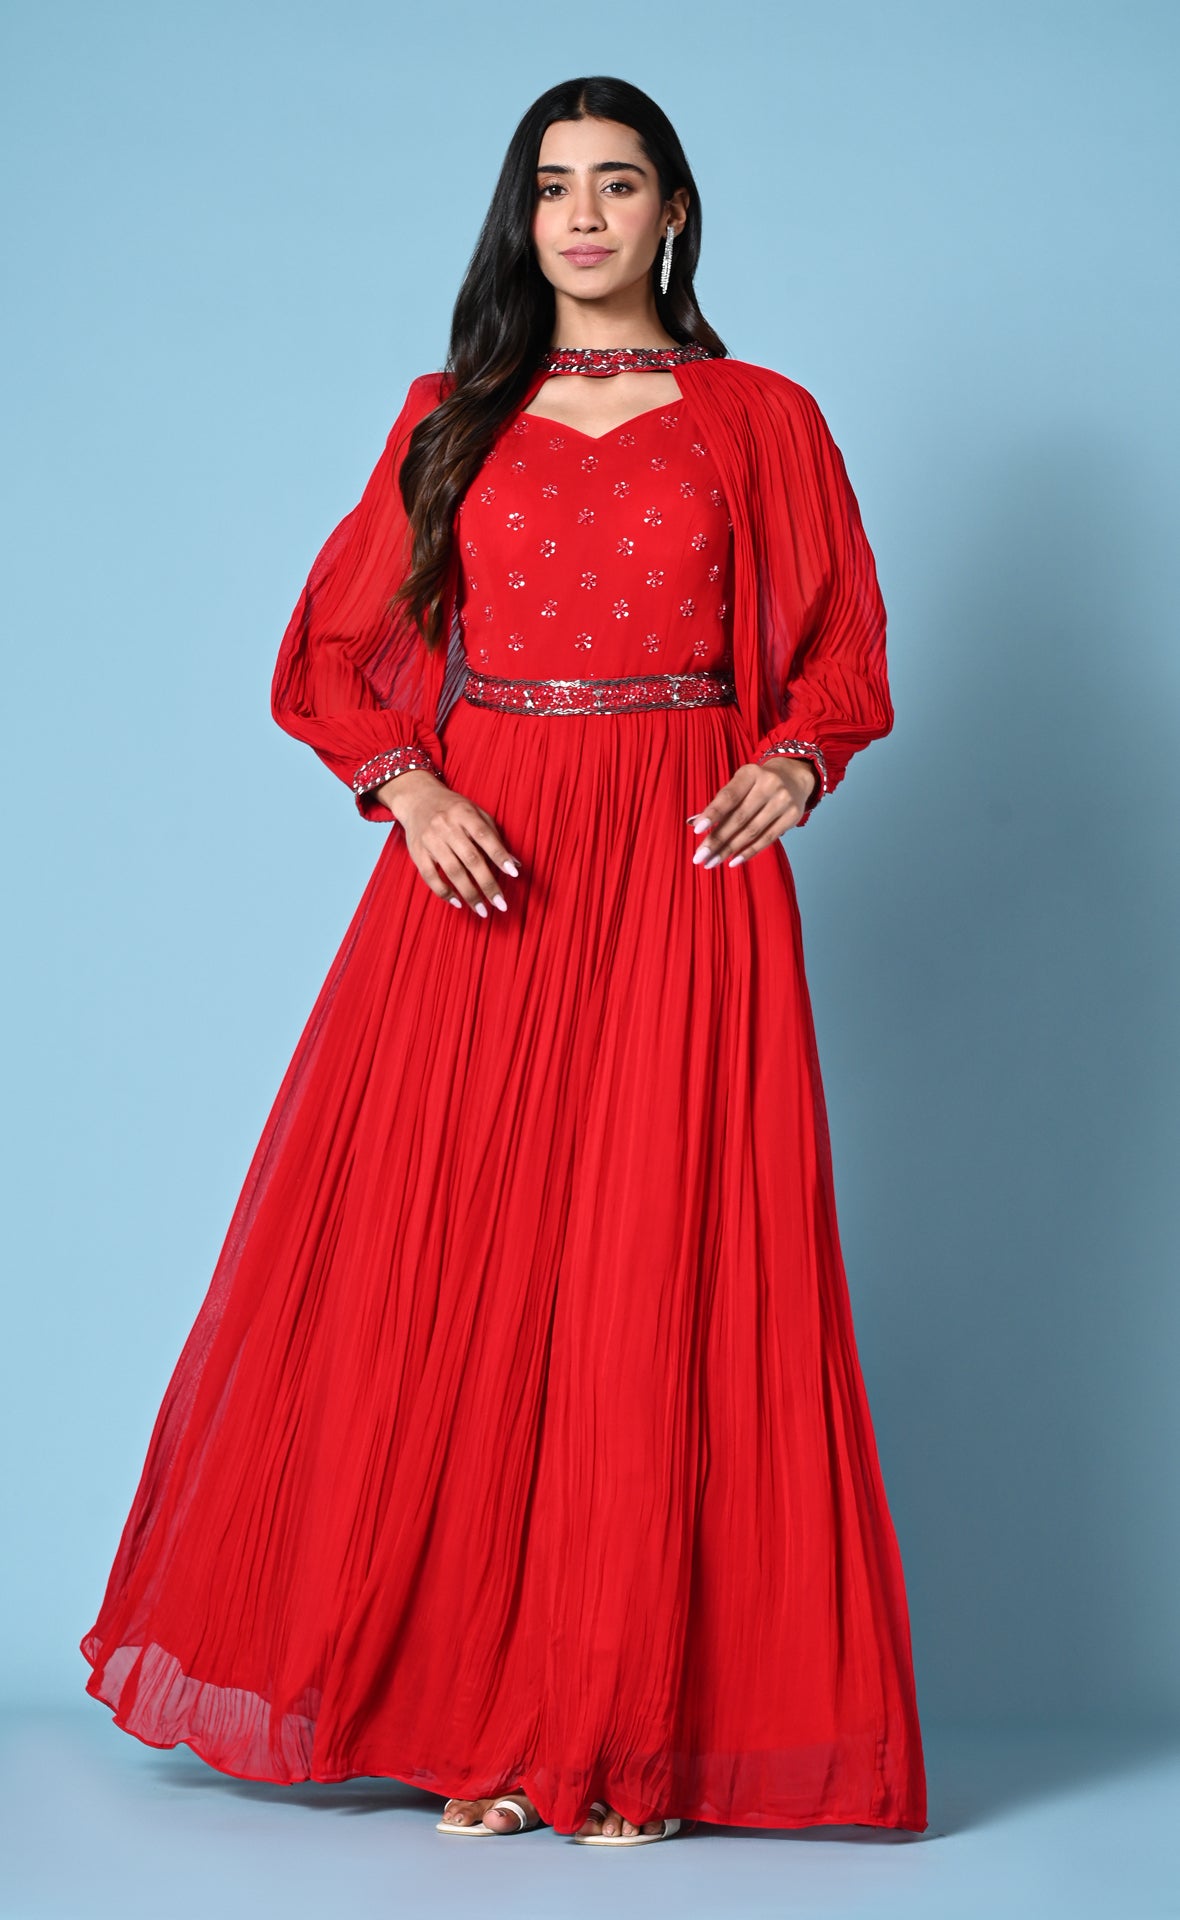 Red cocktail gown with statement sleeve and hip belt